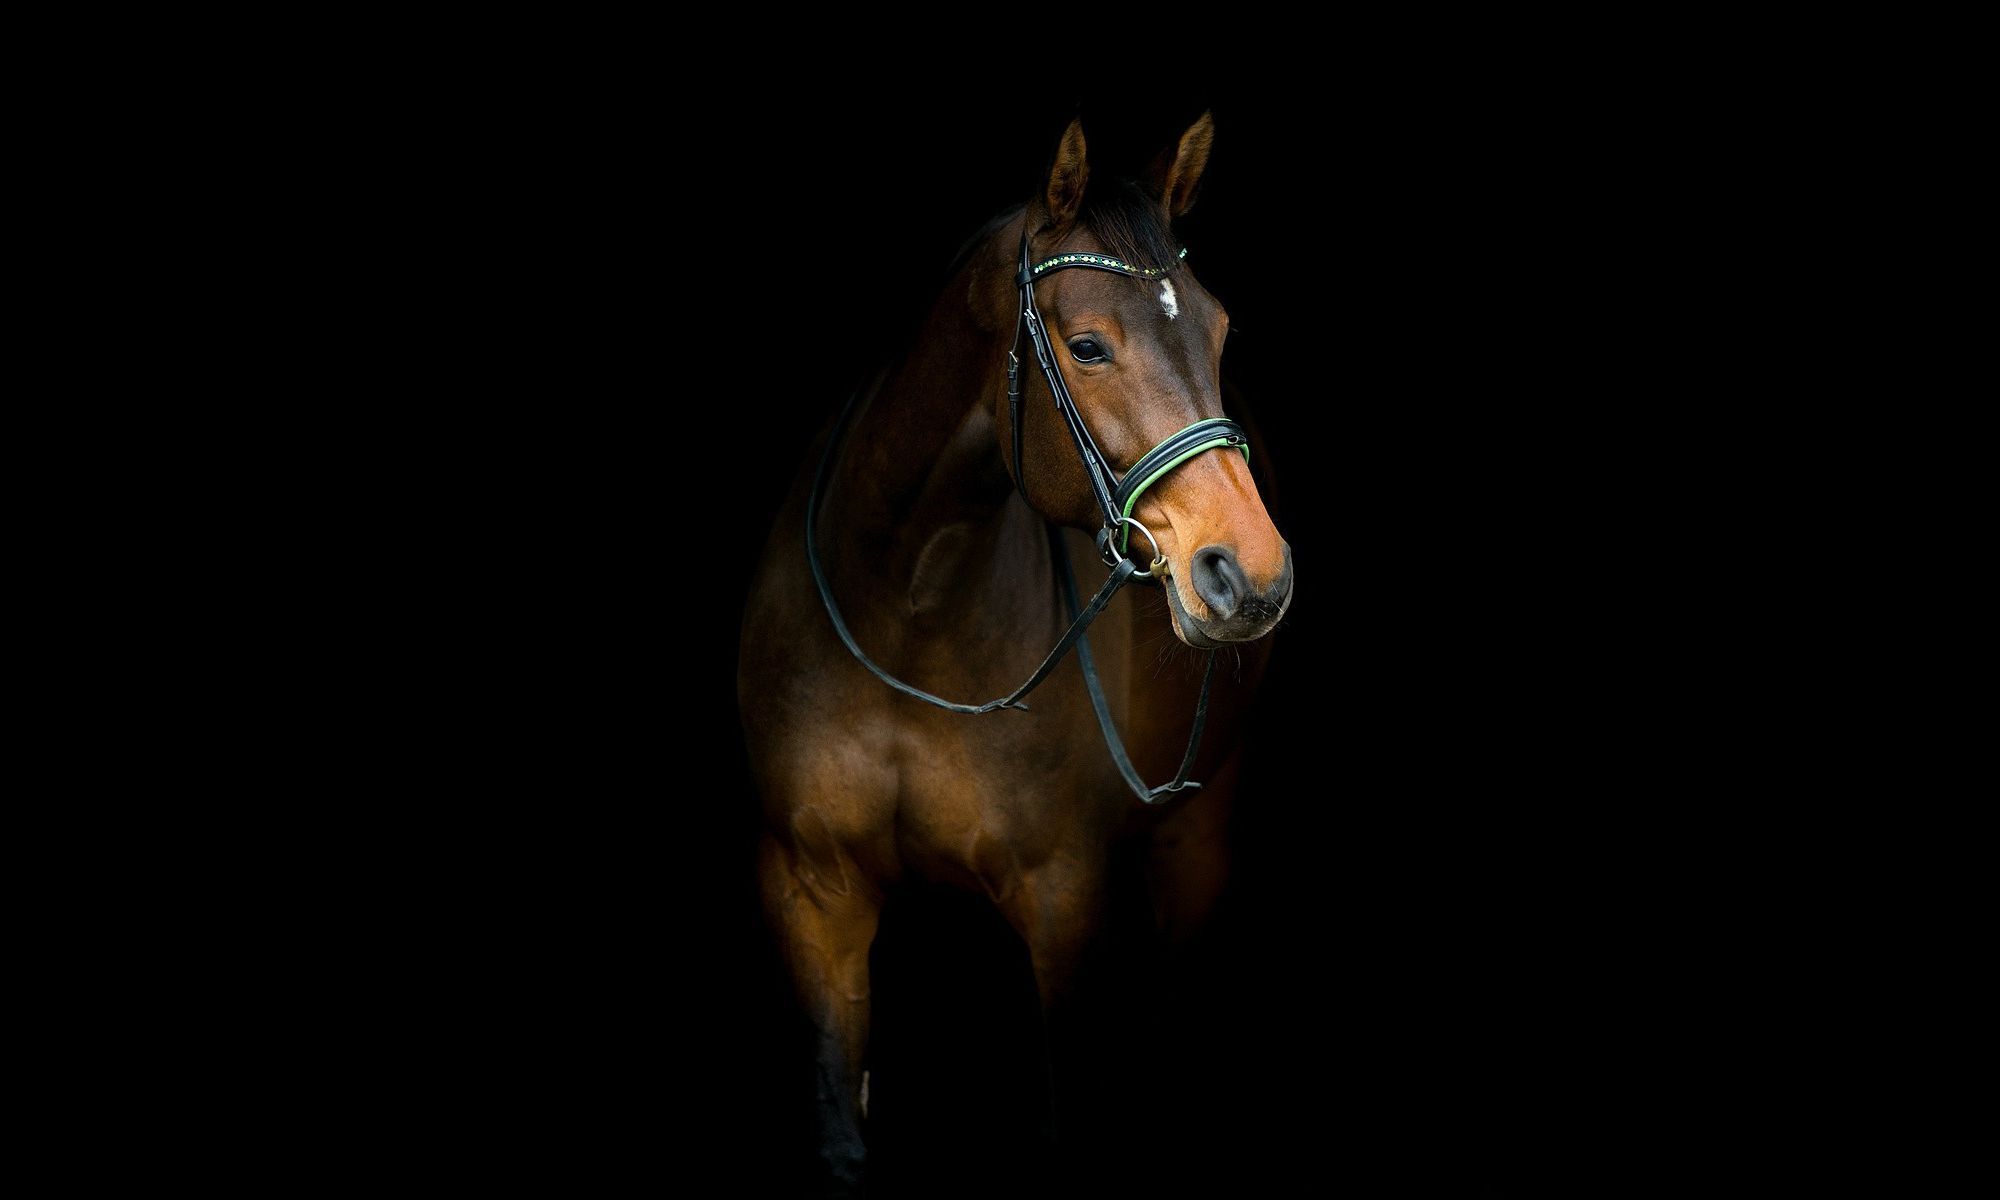 Brown horse features on dark background hd 1080p